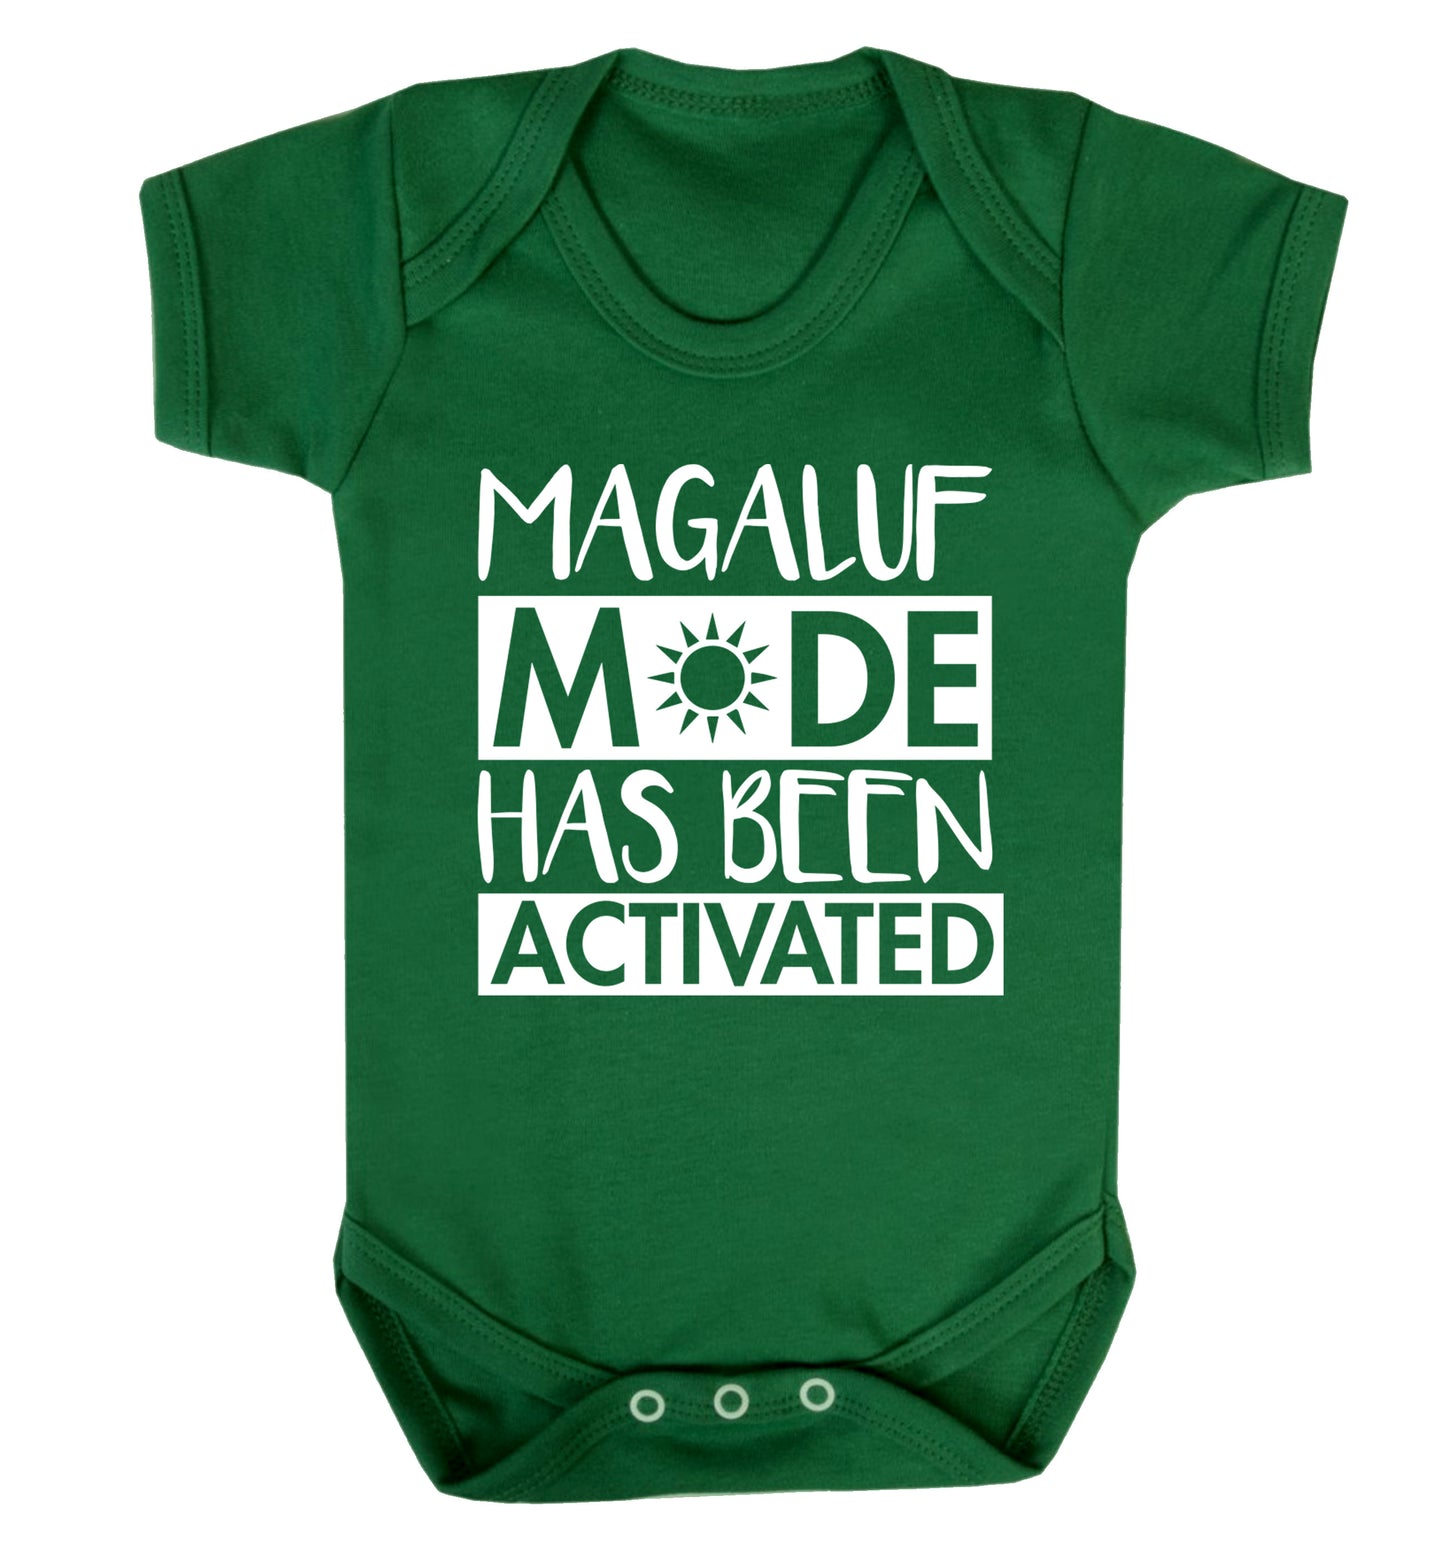 Magaluf mode has been activated Baby Vest green 18-24 months